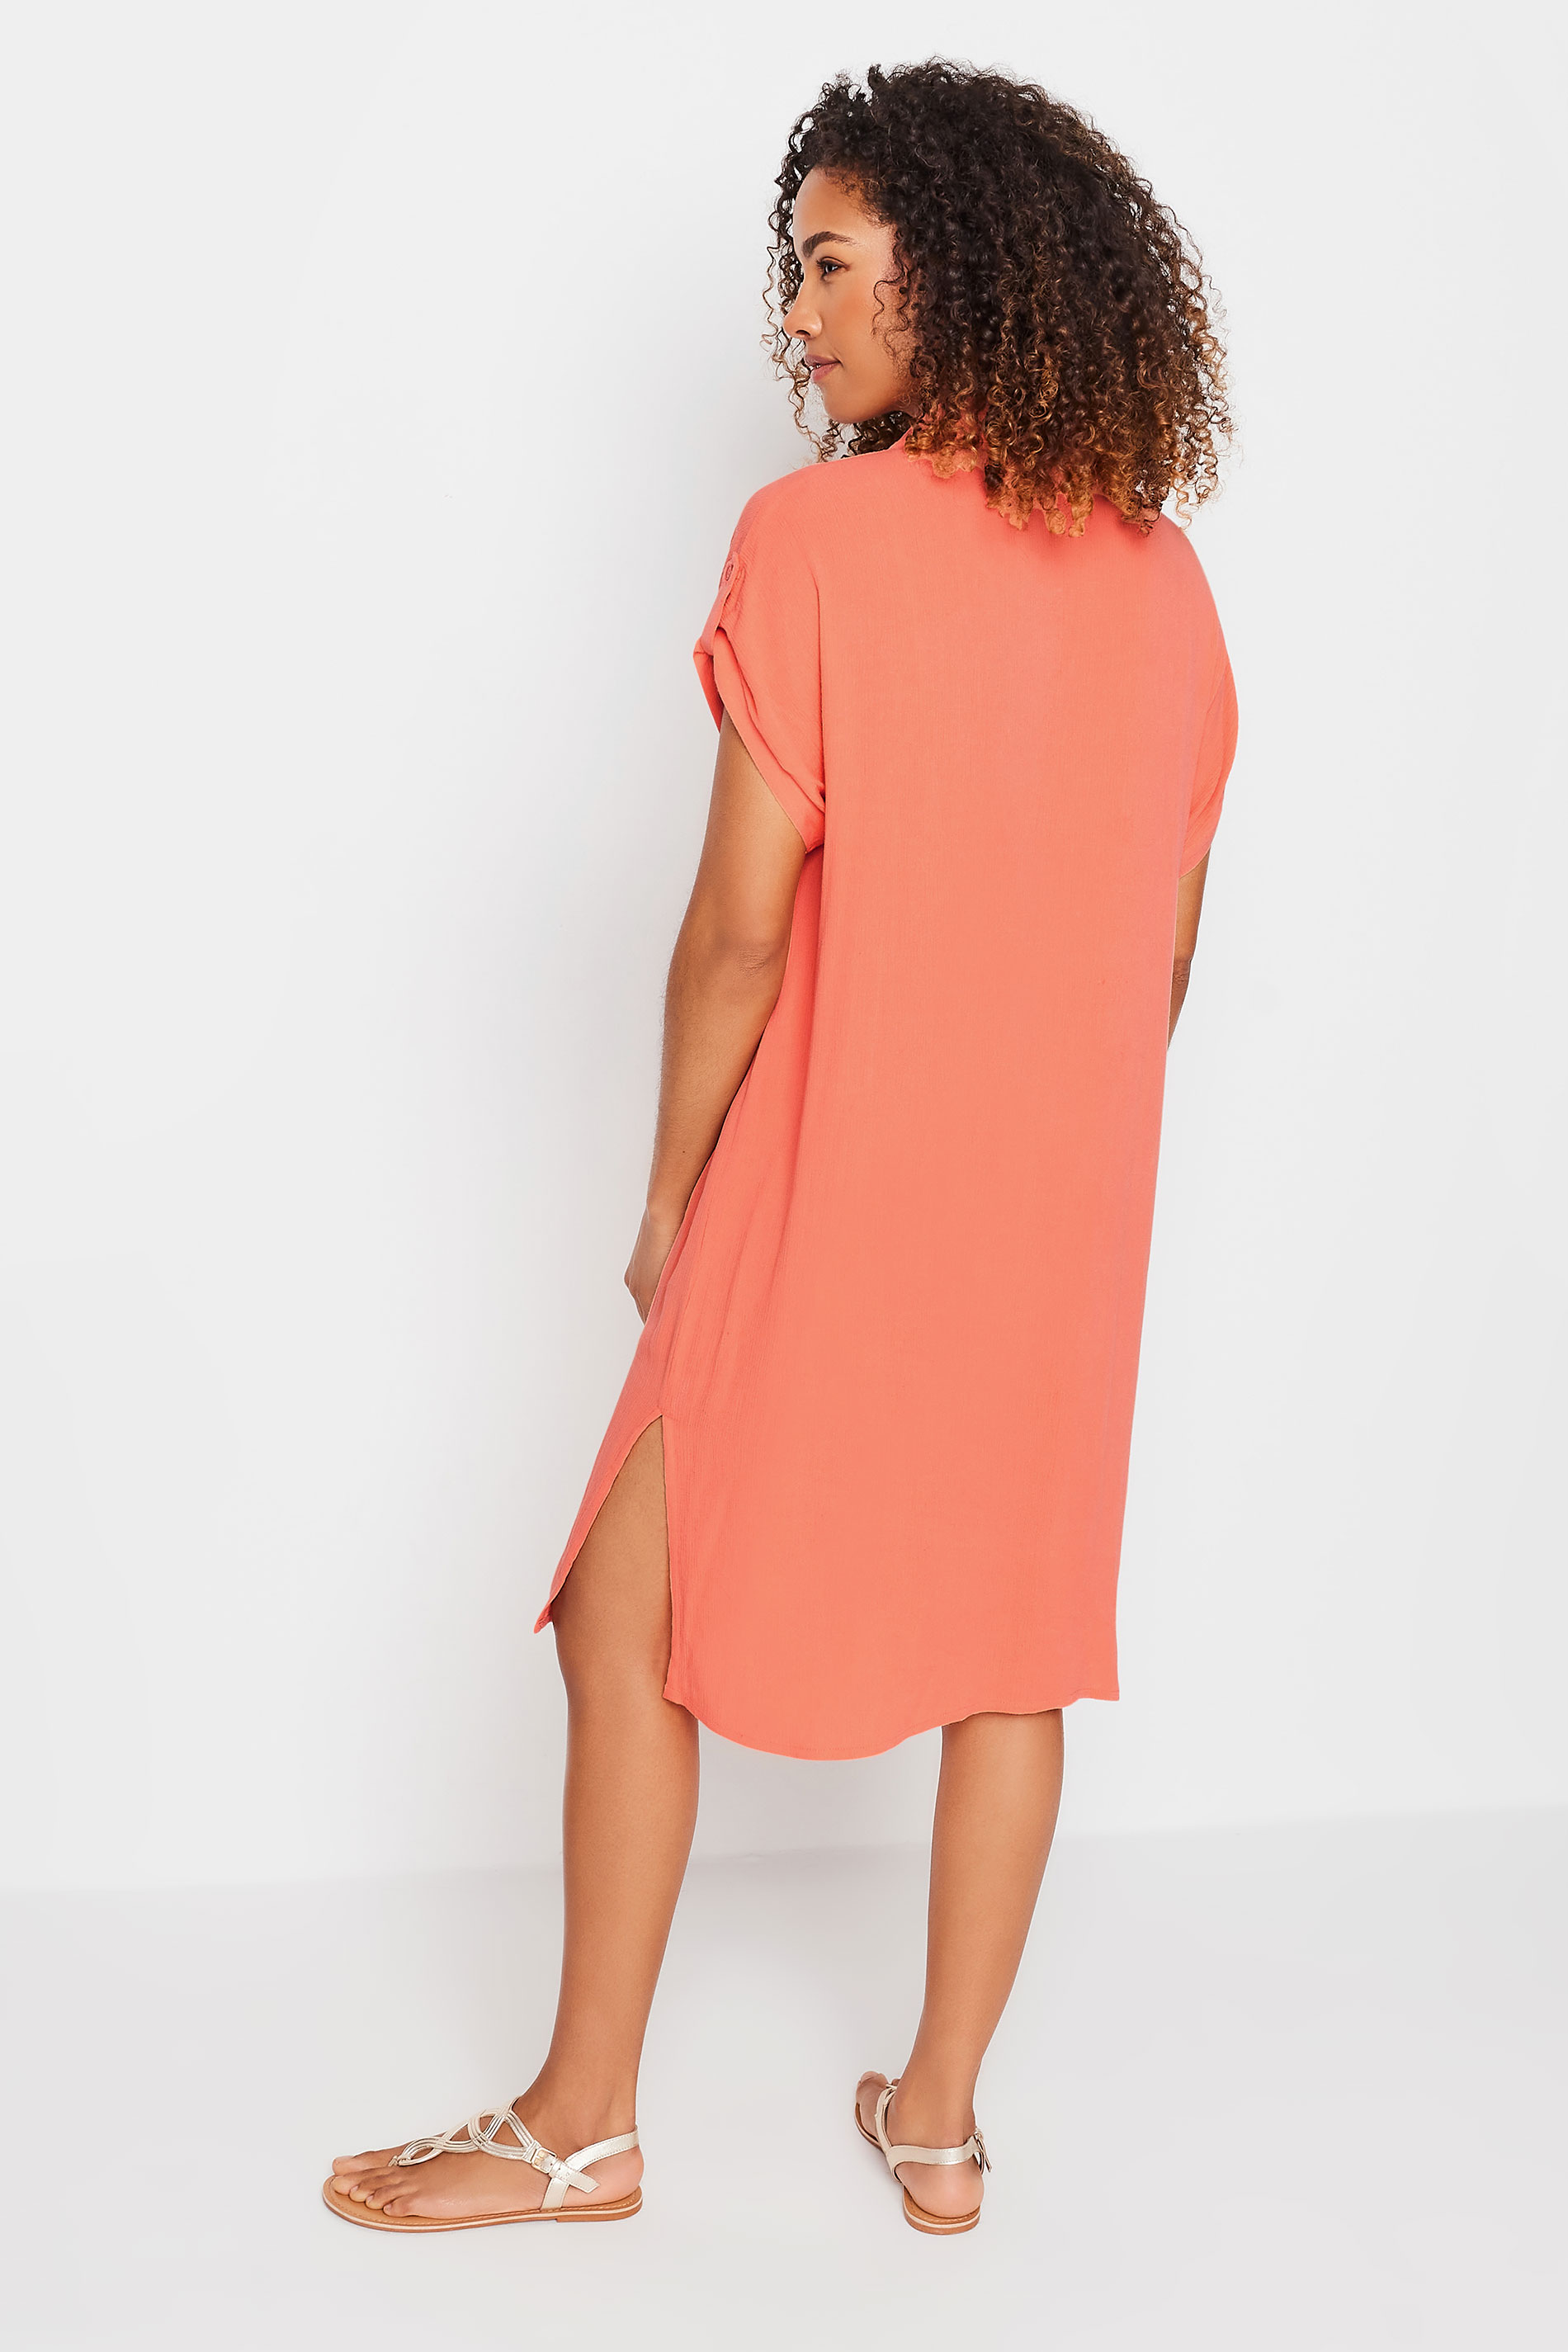 M&Co Coral Pink Short Sleeve Crinkle Shirt Dress| M&Co 3